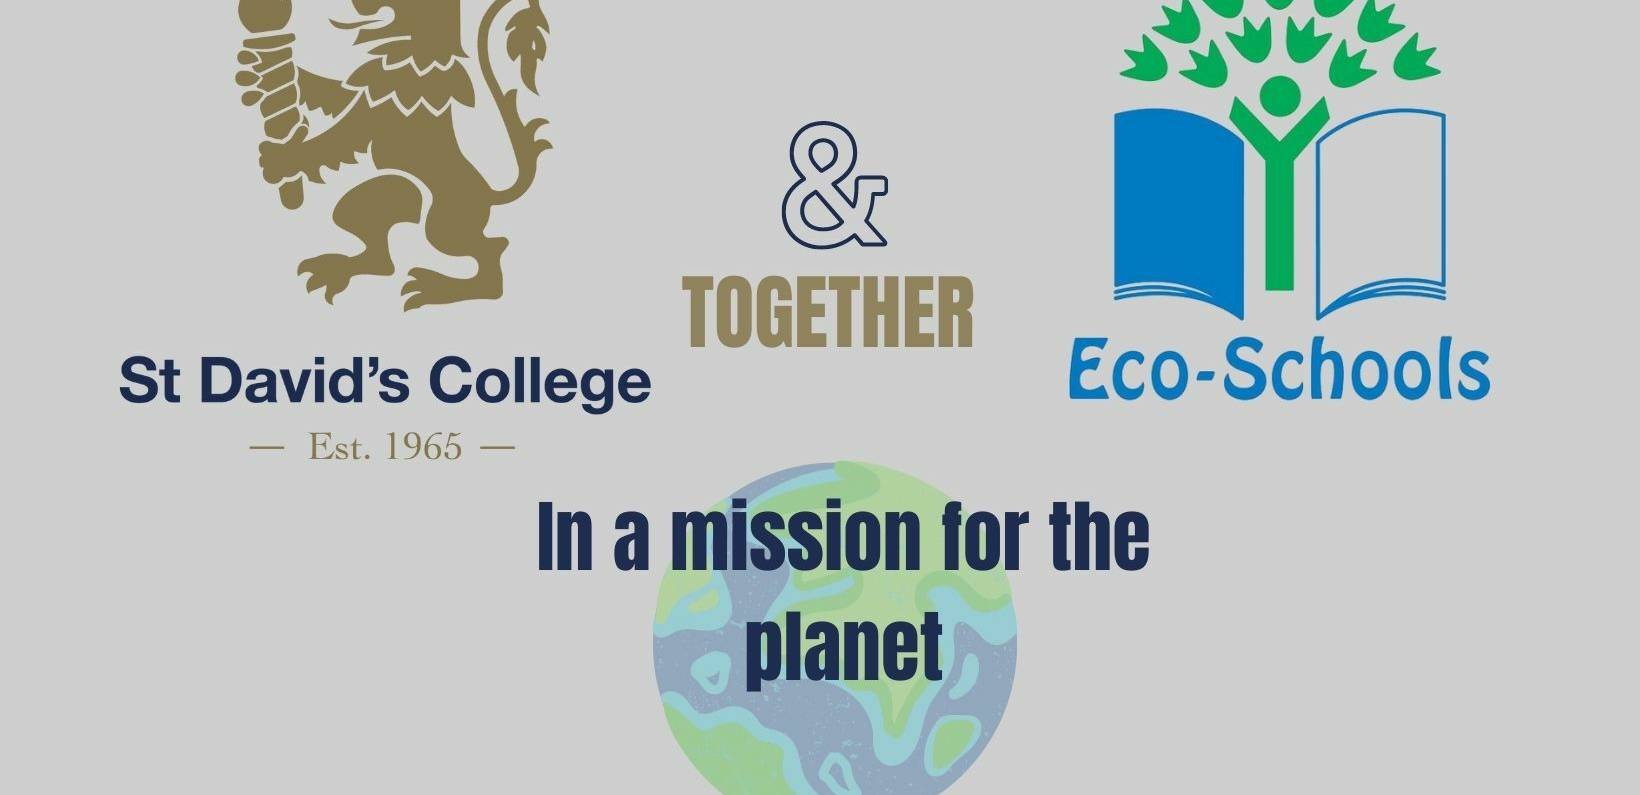 Encouraging students to engage and protect their enviroment Portada para Facebook